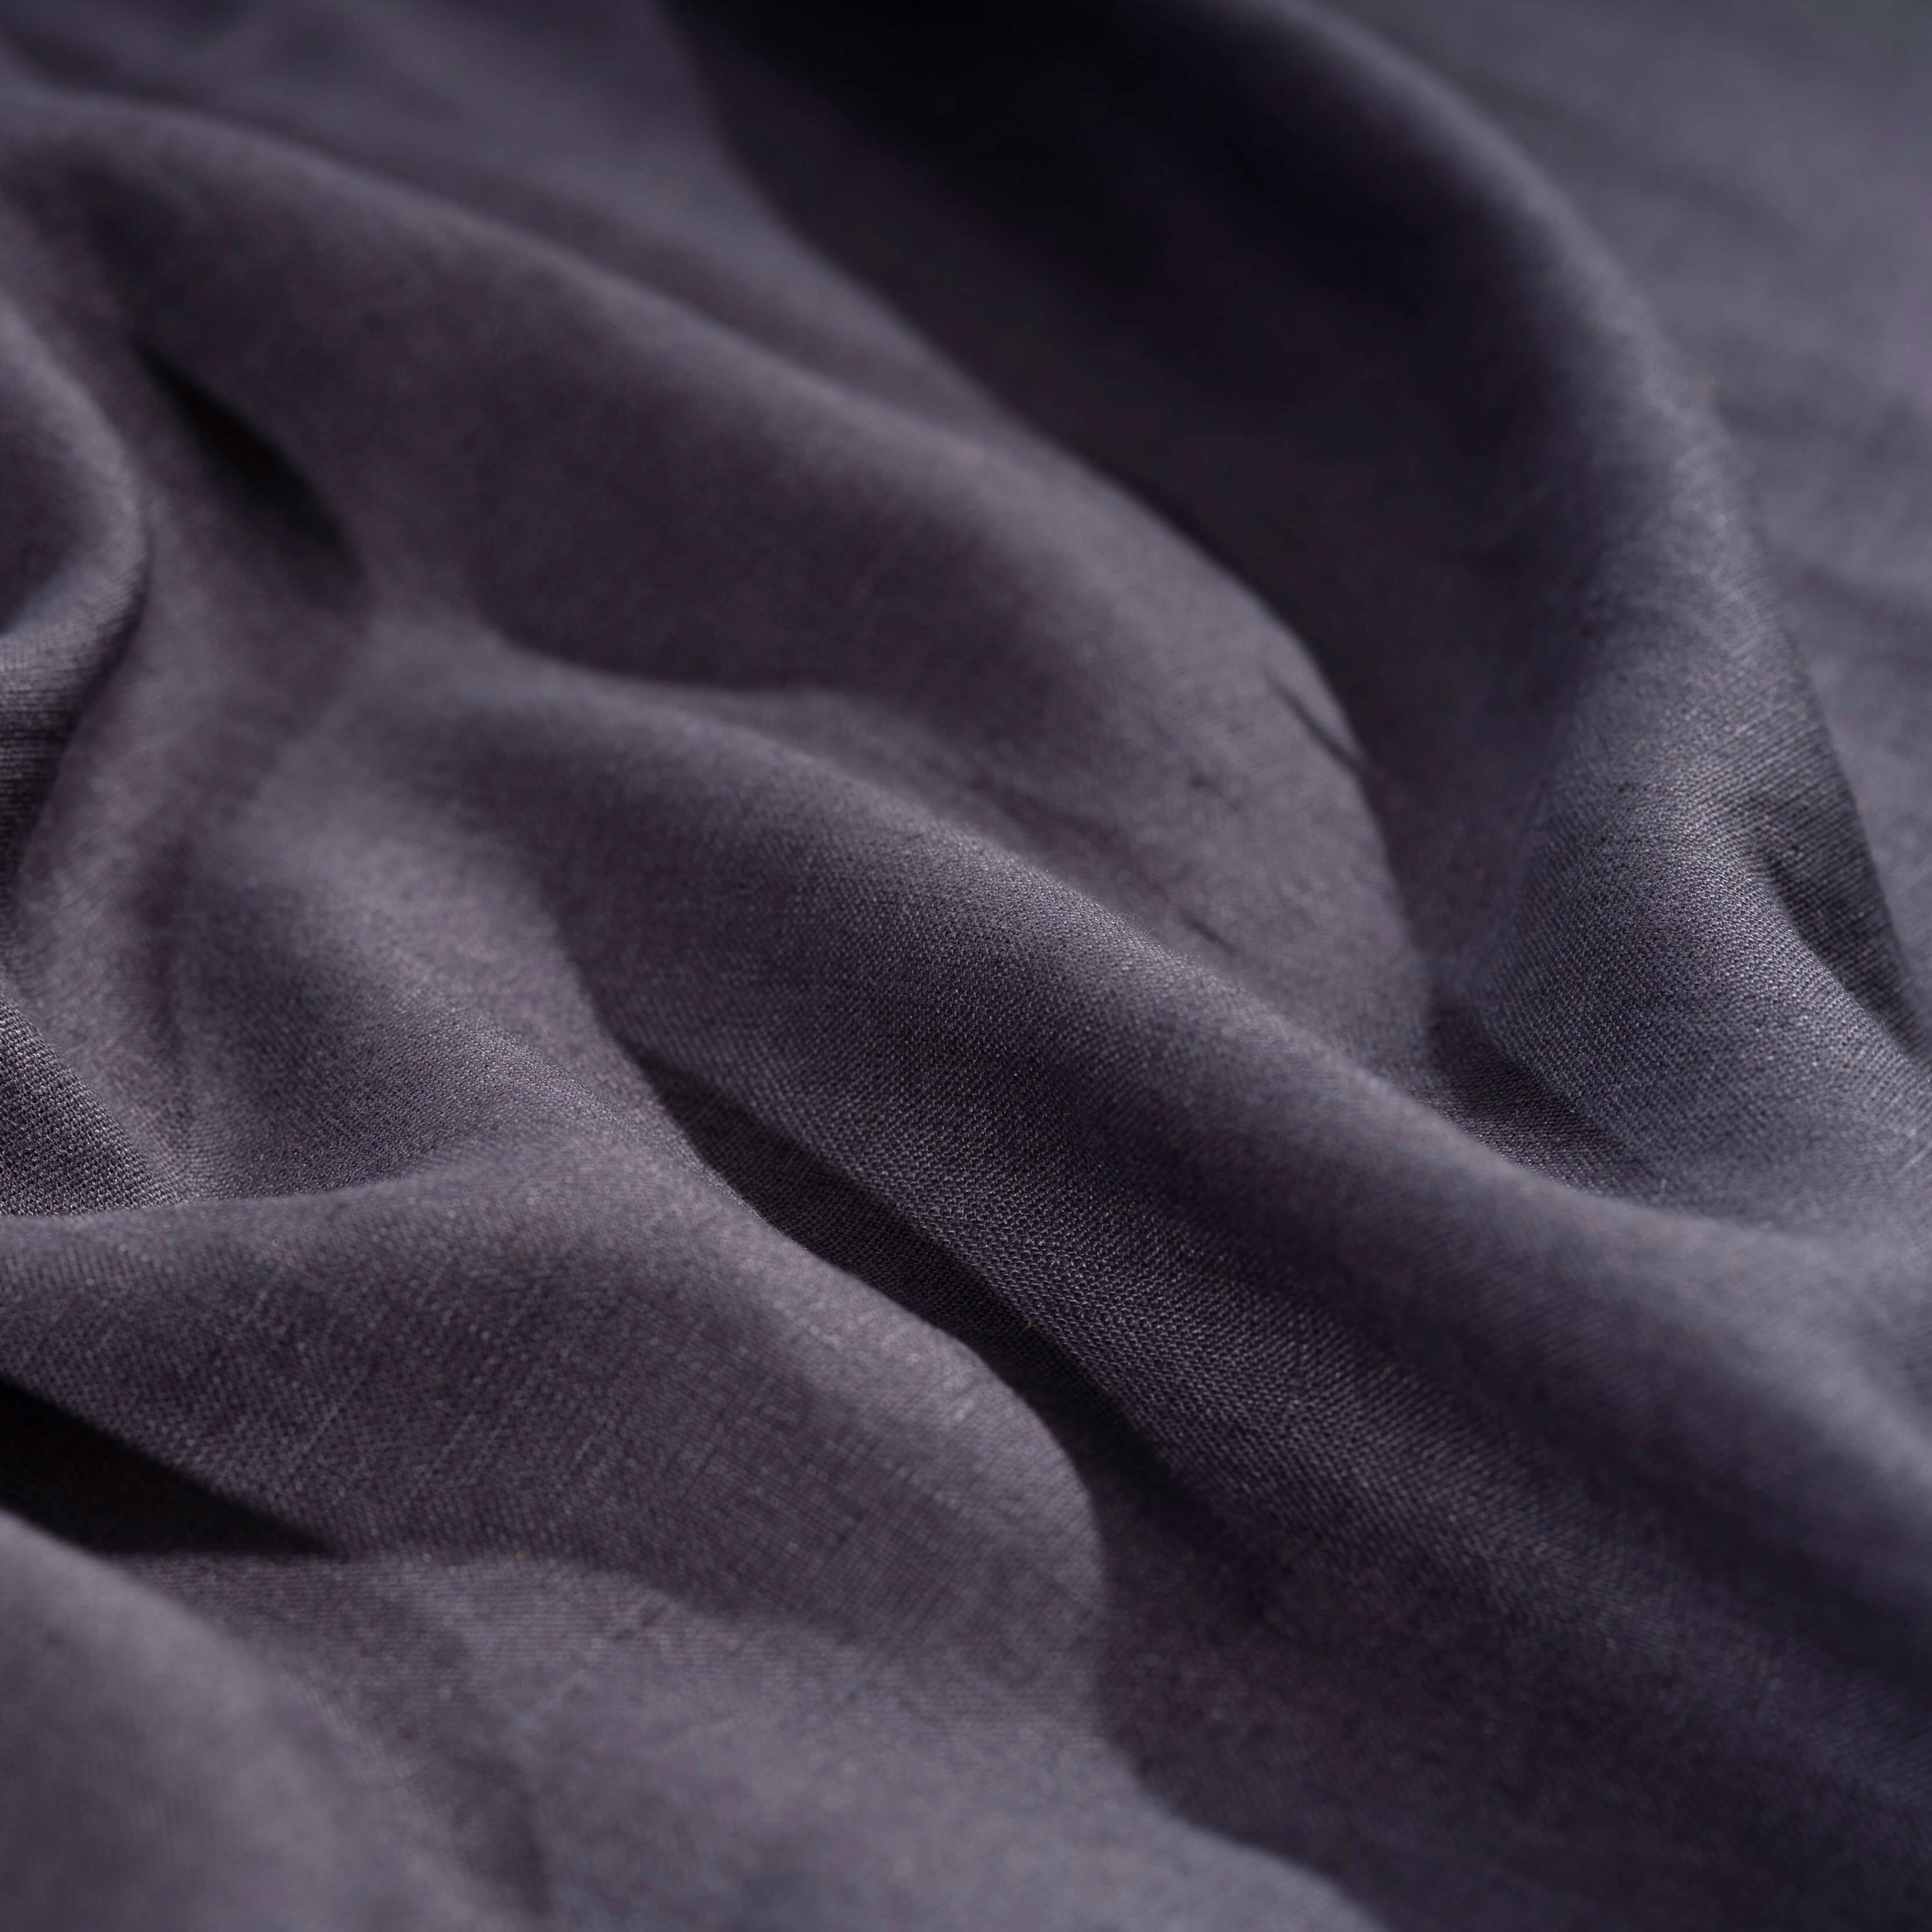 Washed Pure Charcoal Dark Grey Linen Fabric 205 g/m²